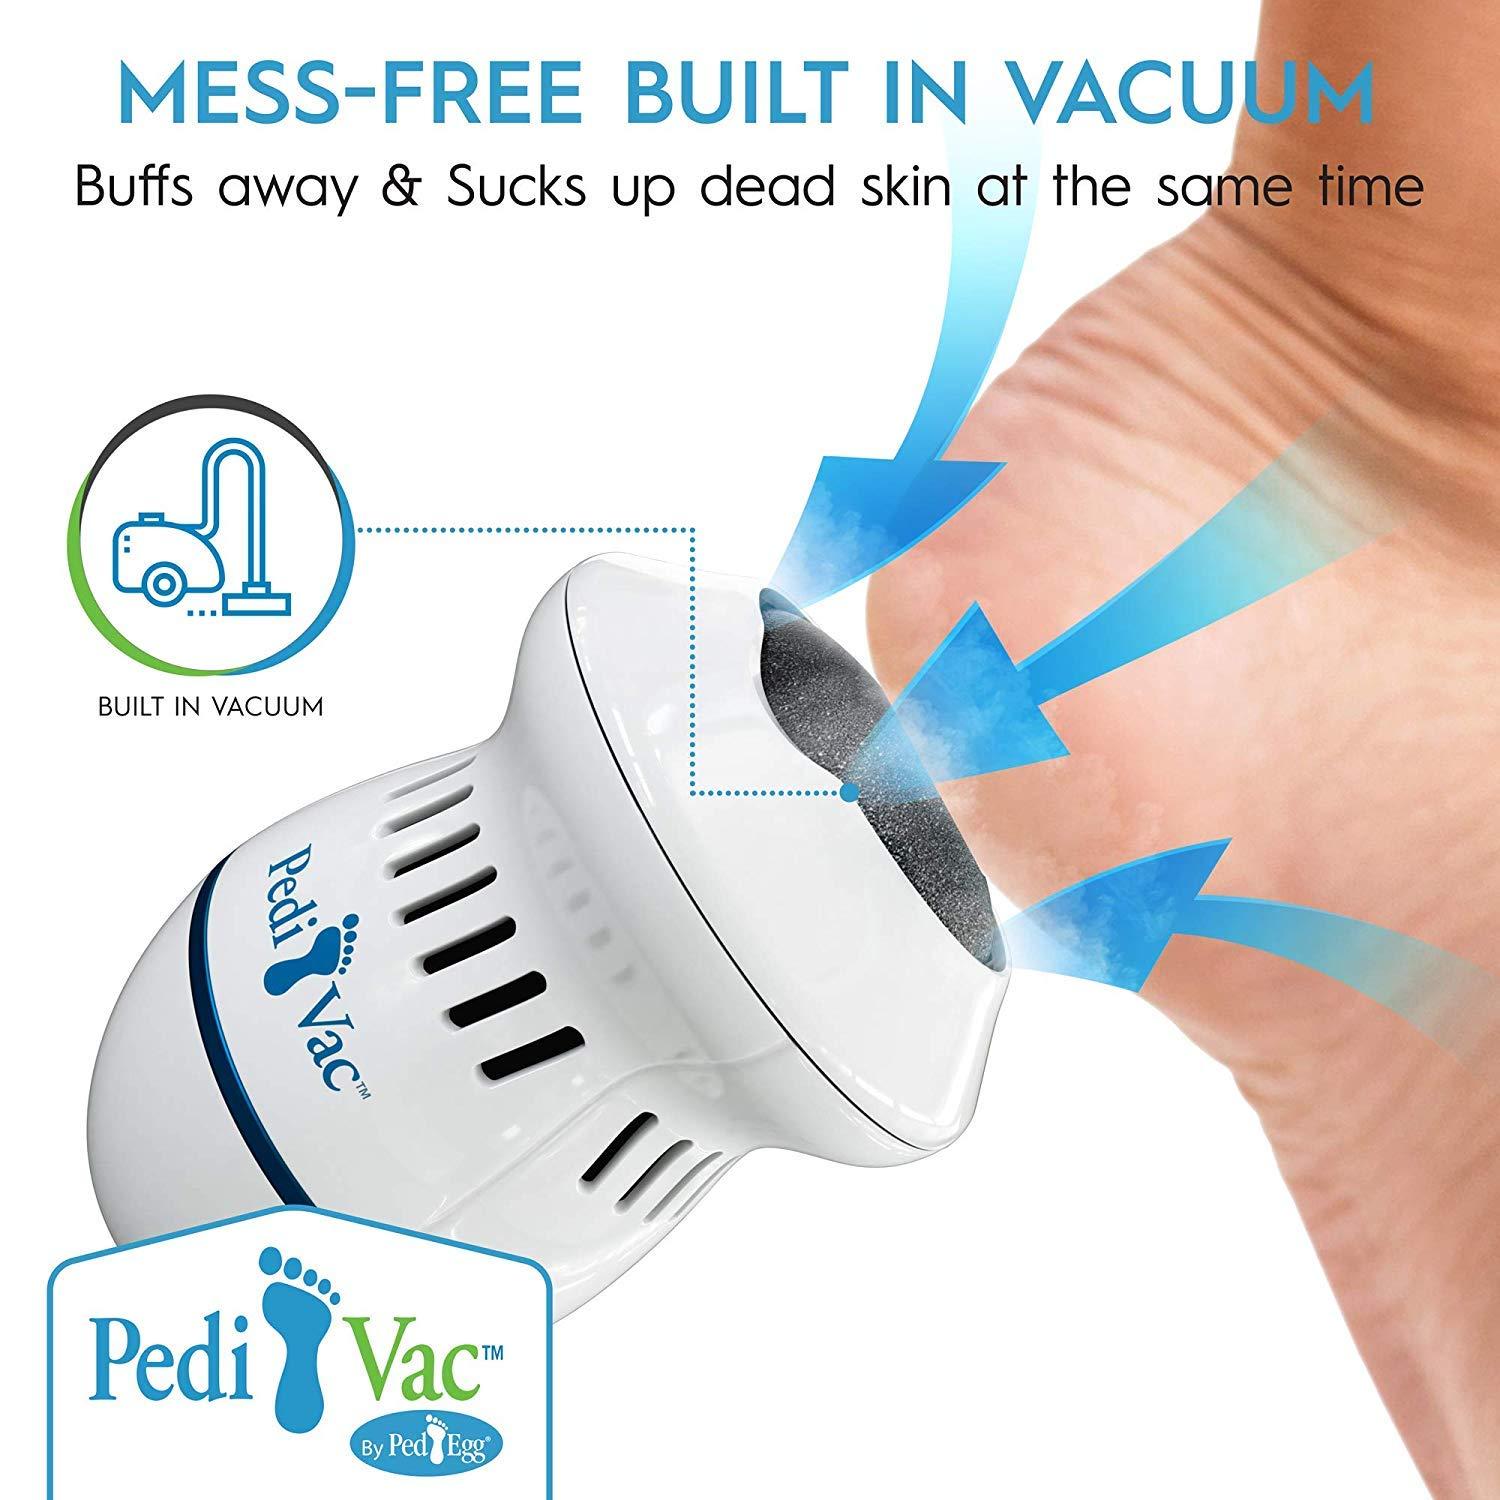 Rechargeable Electric Foot File PediVac - Callus Remover for Feet with  Built-in Vacuum Removes Dead Skin from Feet with 2000 RPMs - Electric Callus  Remover Sucks Up Shavings for Mess-Free Exfoliation